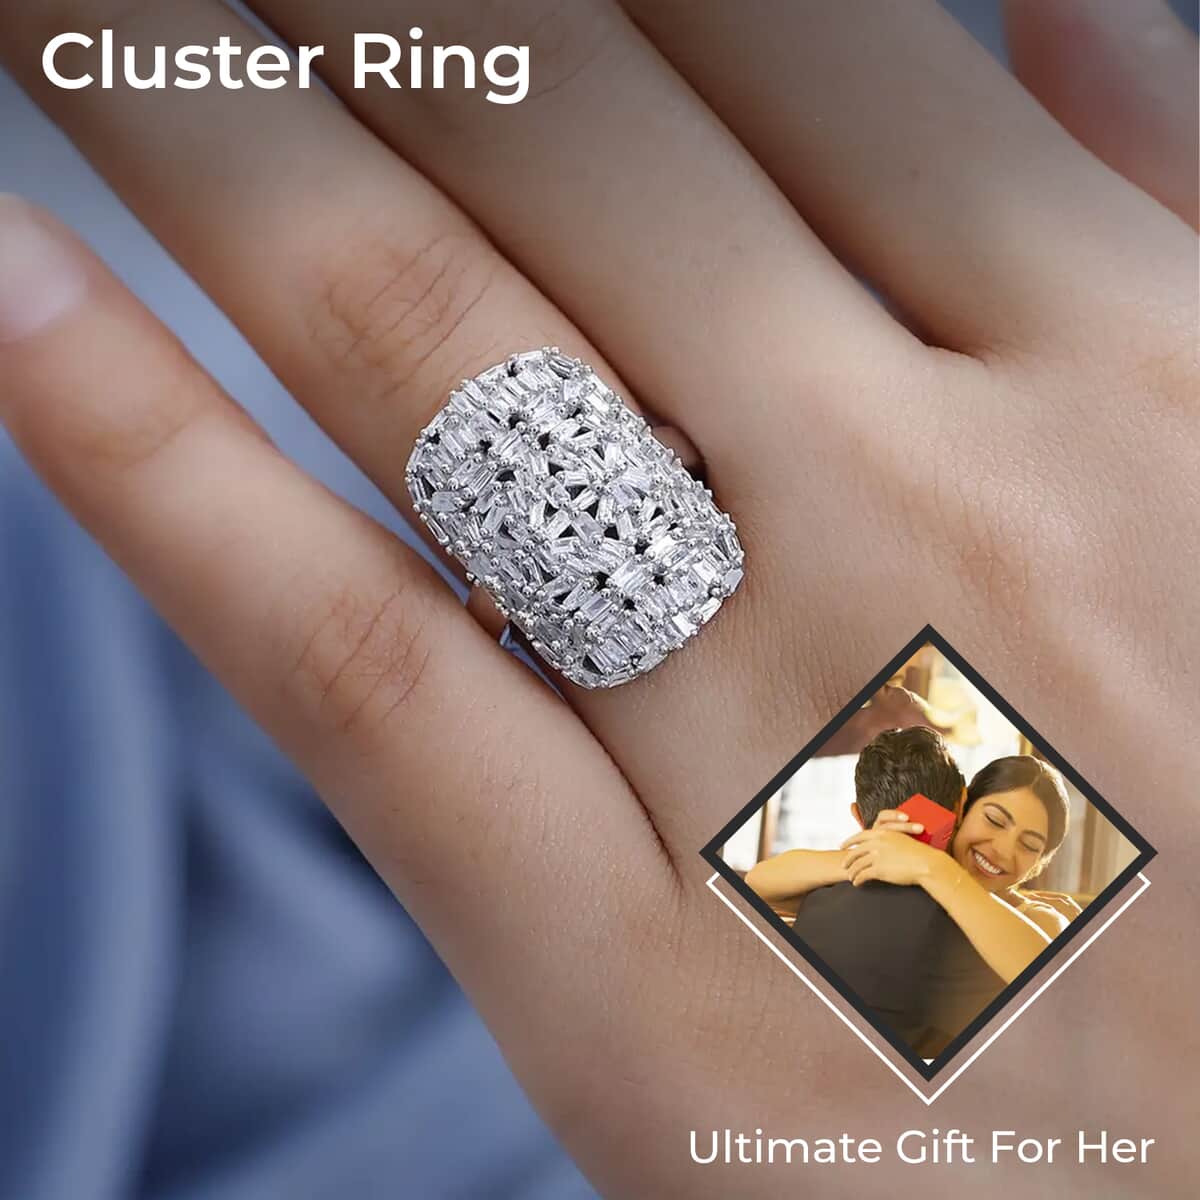 Diamond Cluster Ring, Diamond Ring, Cluster Cocktail Ring, Platinum Over Sterling Silver Ring,  Diamond Jewelry For Her 1.00 ctw (Size 8.0) image number 2